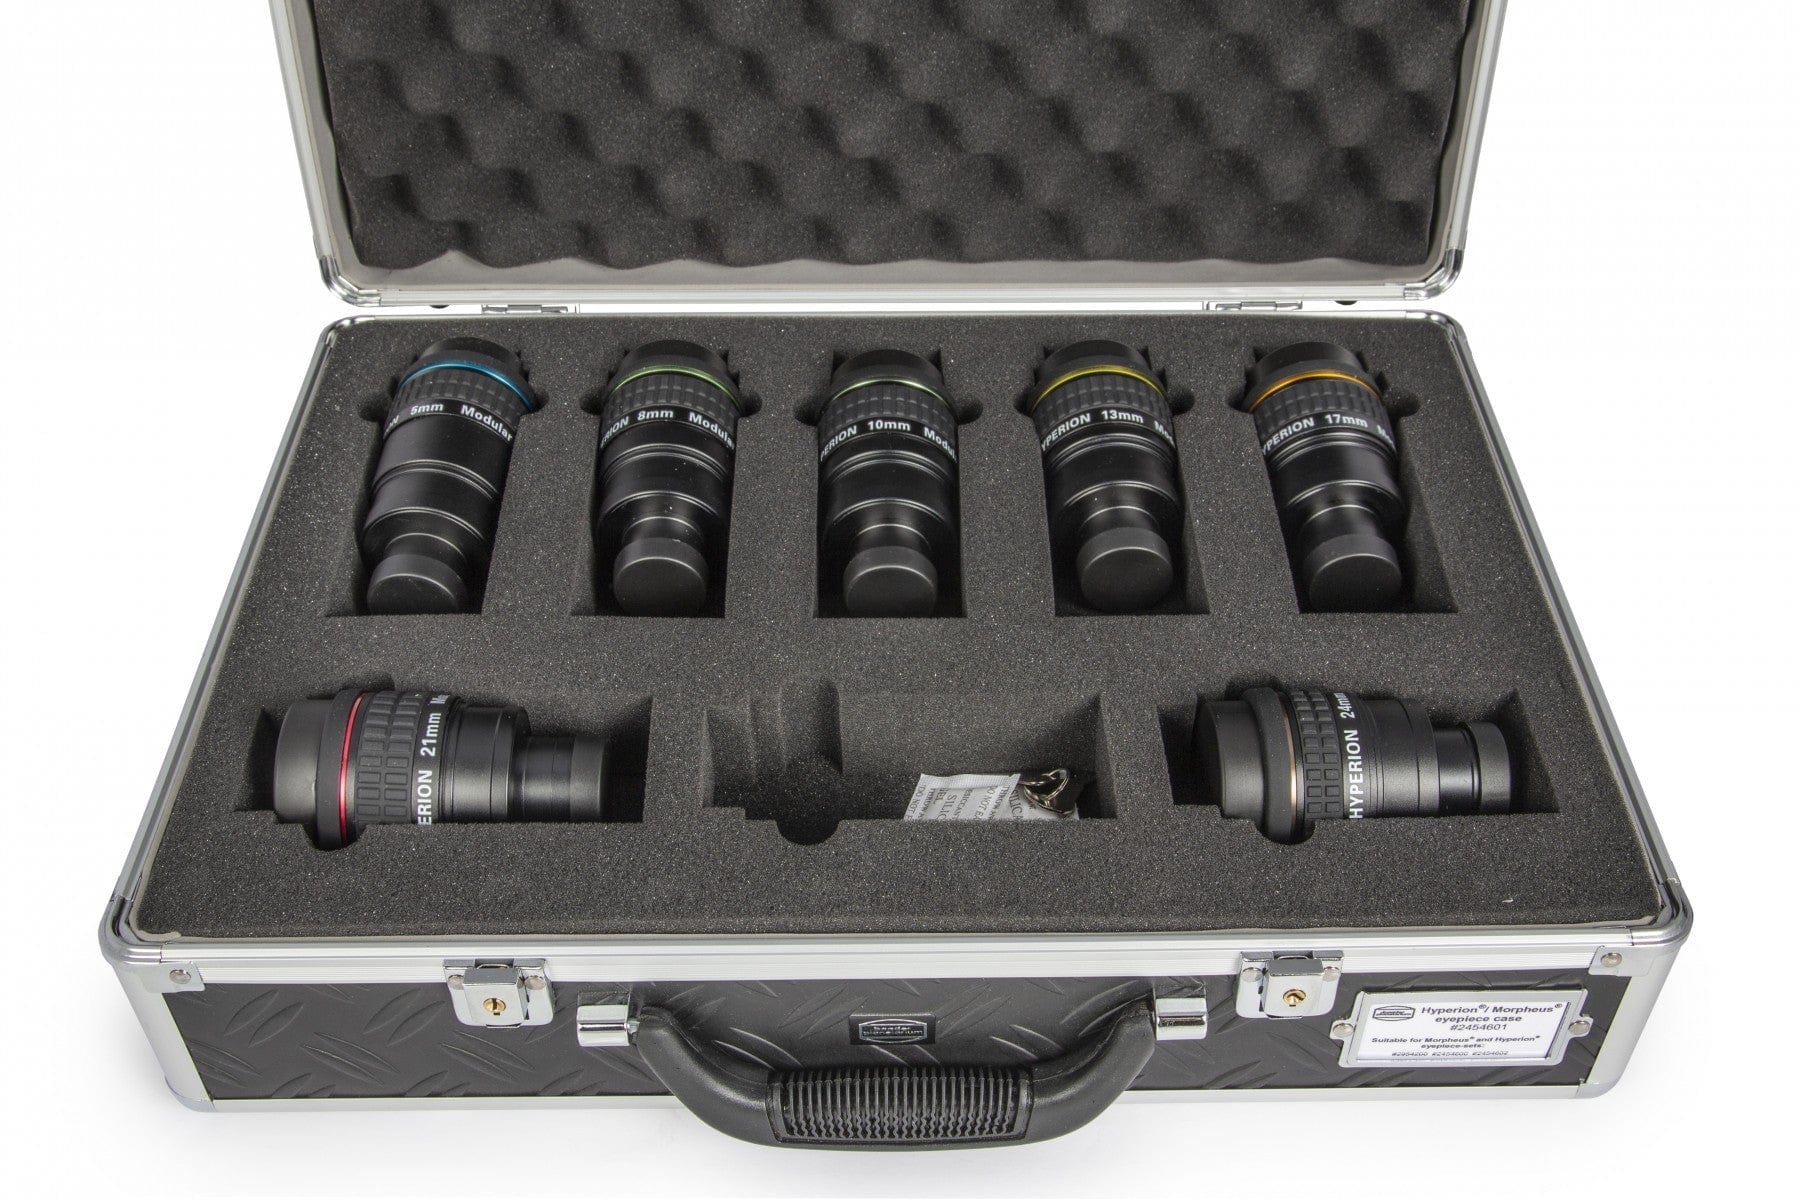 Baader Planetarium Eyepiece Baader Complete Eyepiece Set Consisting of All 7 Hyperion Modular Eyepieces - Includes Fitted Hardcase - 2454600